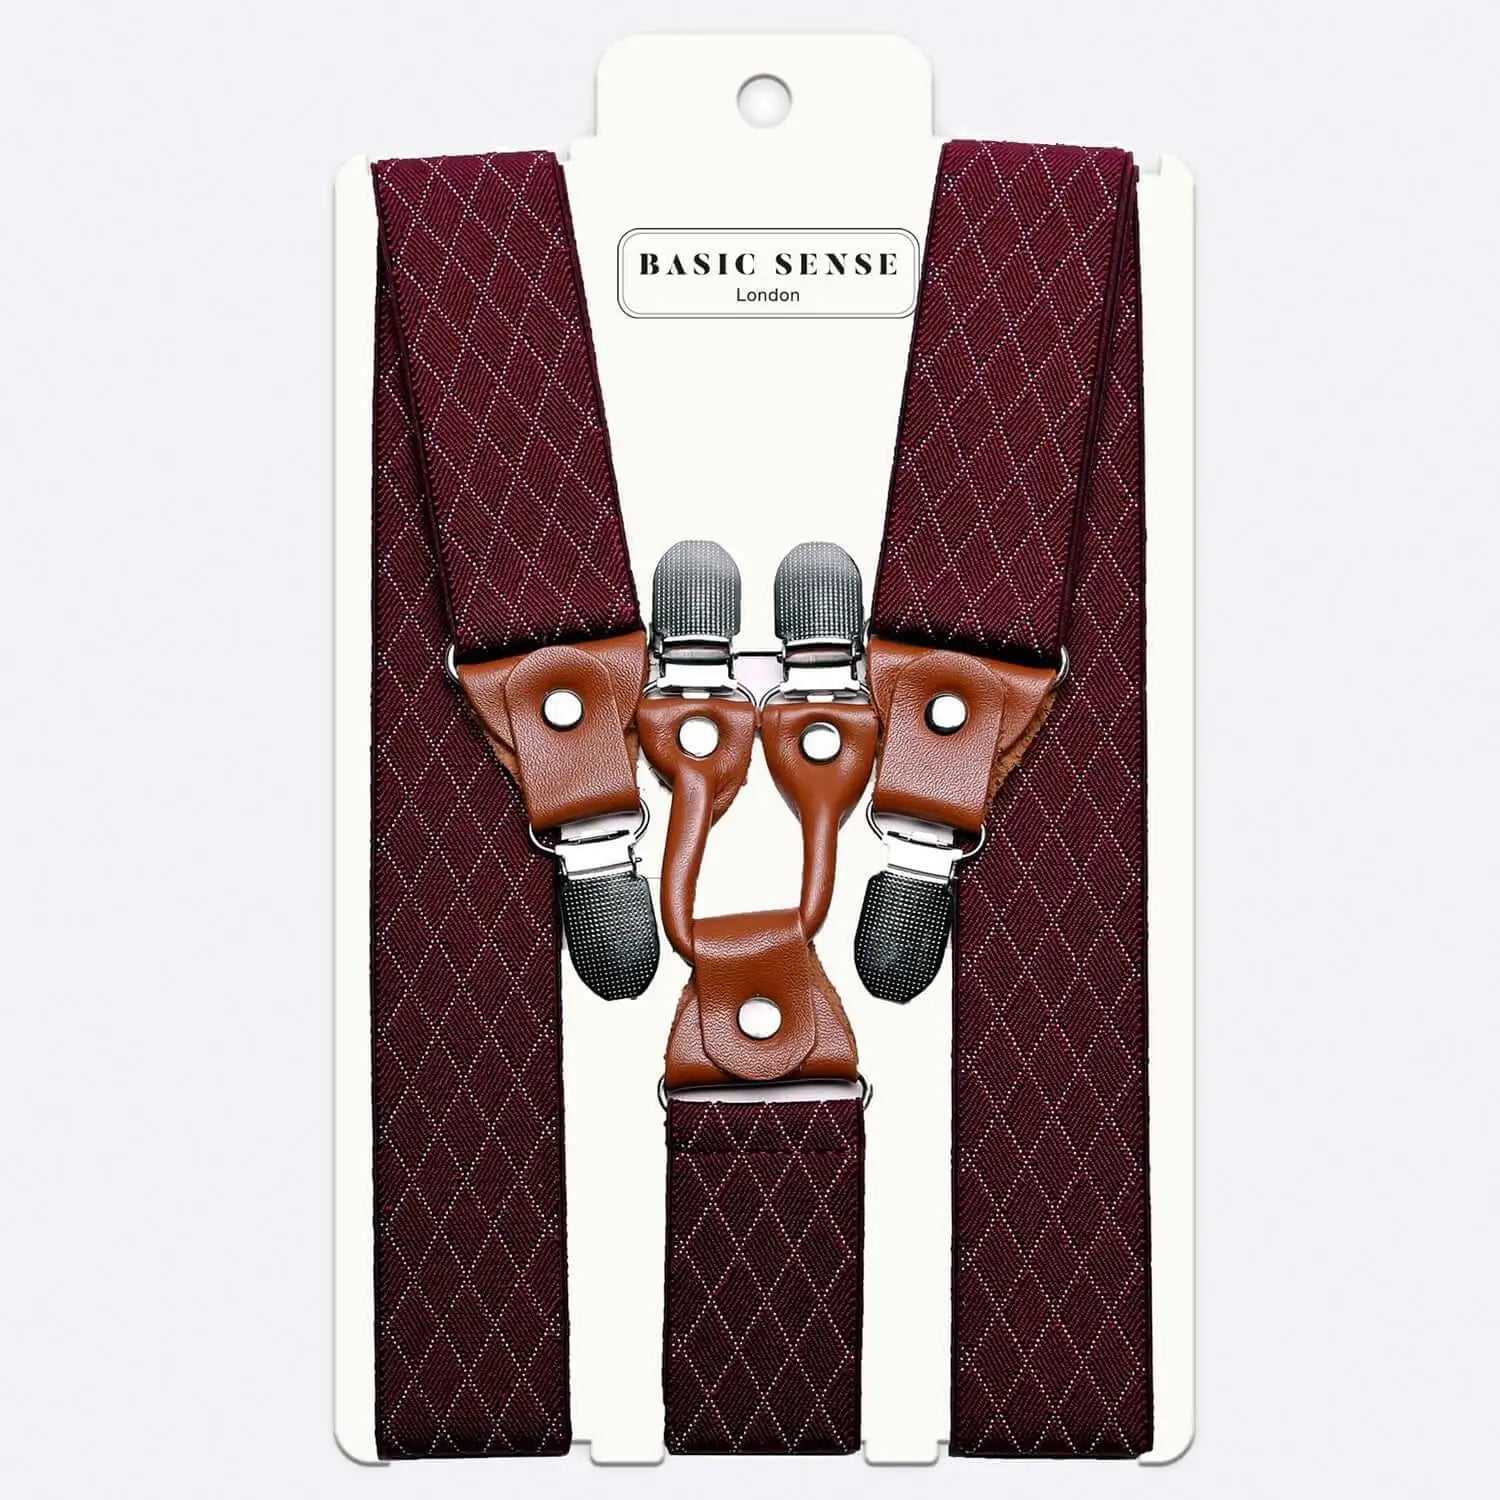 Men’s 35mm Y-Shape Wide Leather Braces with Tie on White Background